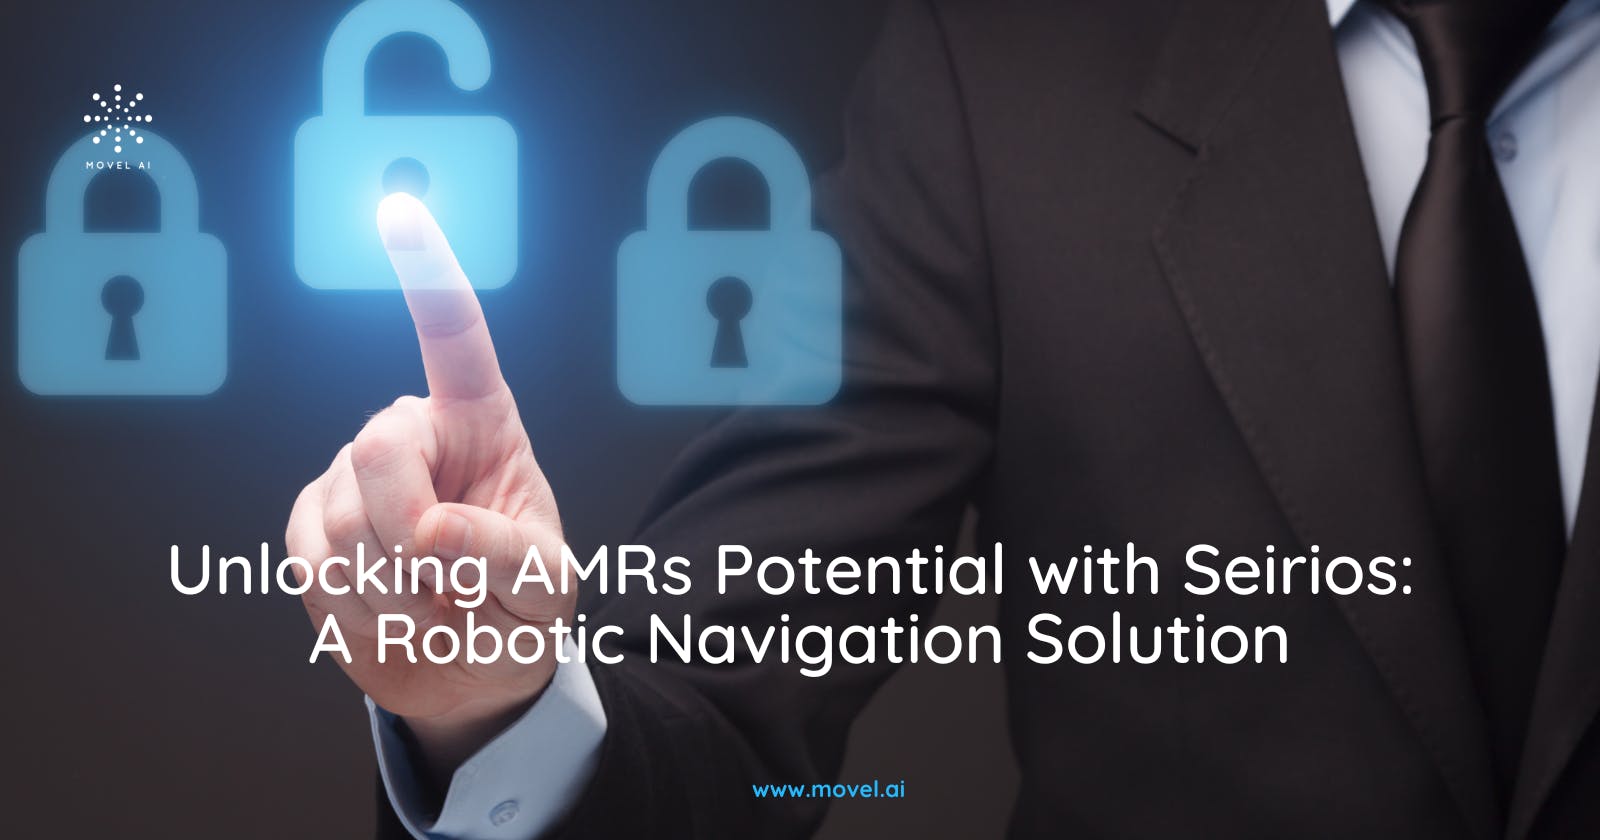 Unlocking AMRs Potential with Seirios: A Robotic Navigation Solution